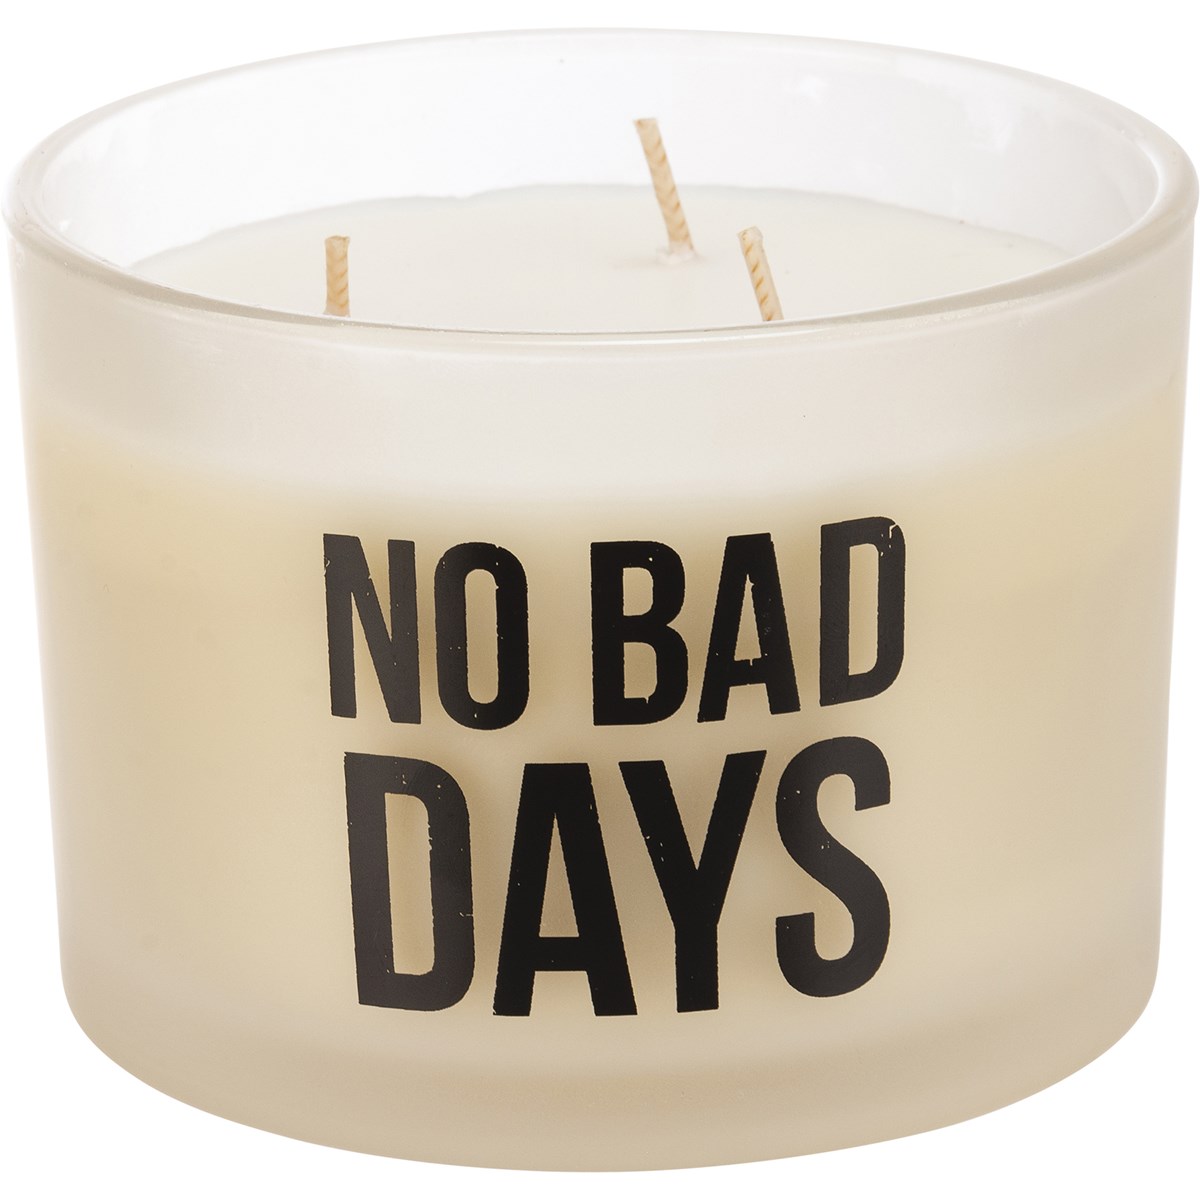 No Bad Days Candle - Soy Wax, Glass, Cotton